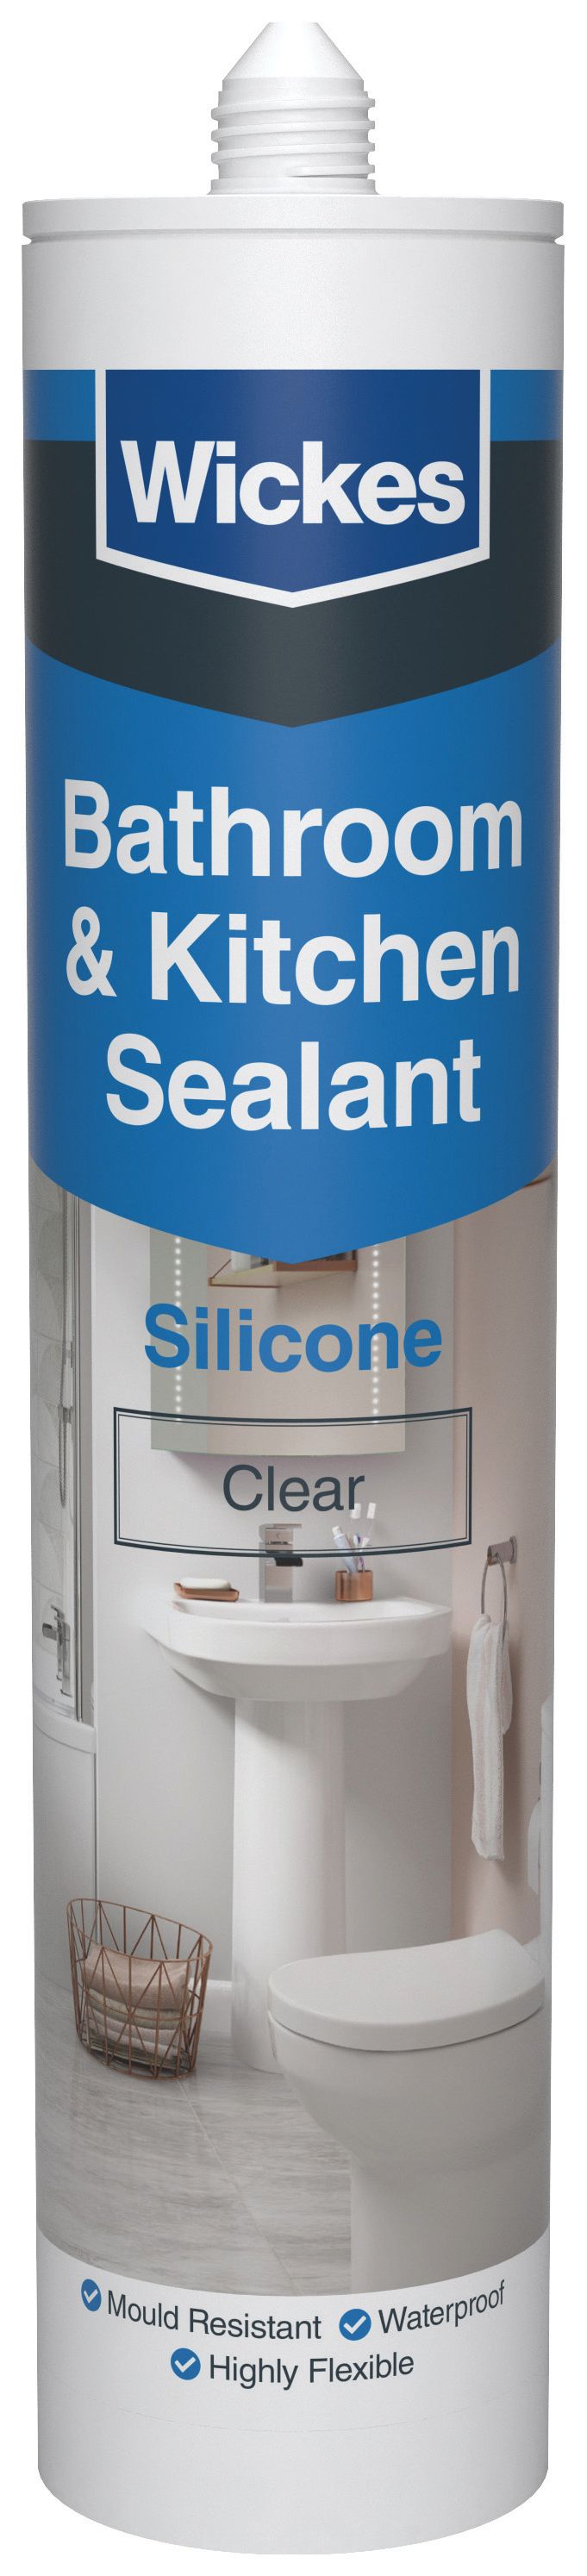 Image of Wickes Kitchen & Bathroom Silicone Sealant - Clear - 300ml